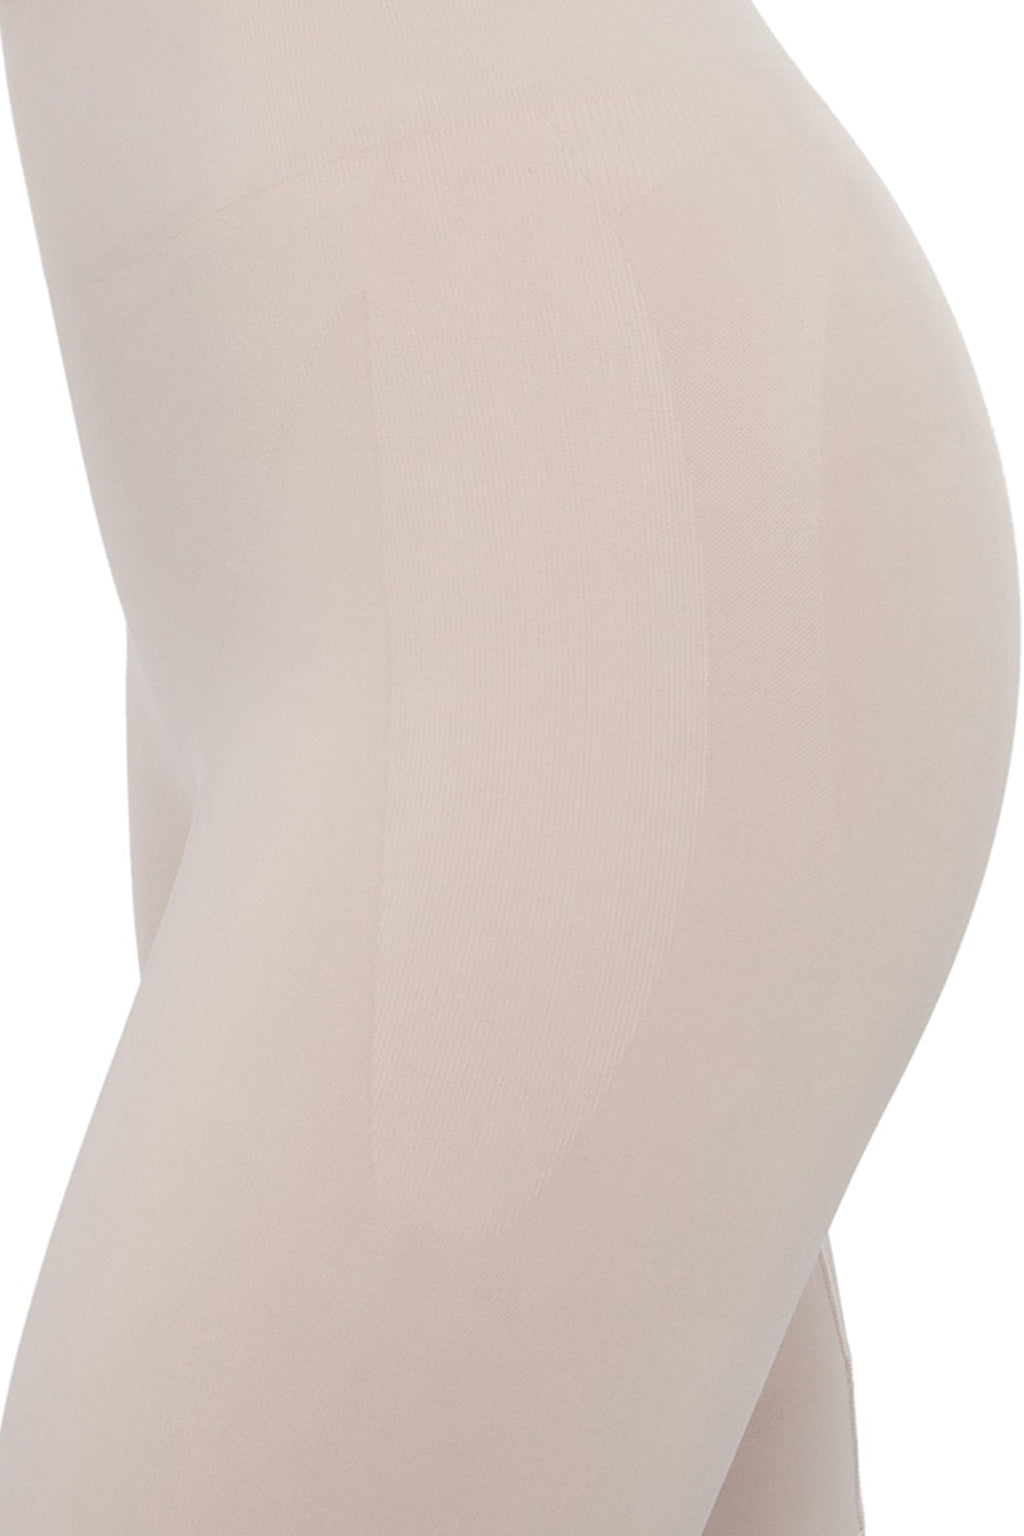 Bermuda shapewear, Brazilian activewear for waist and stomach, tightens your waist immediately